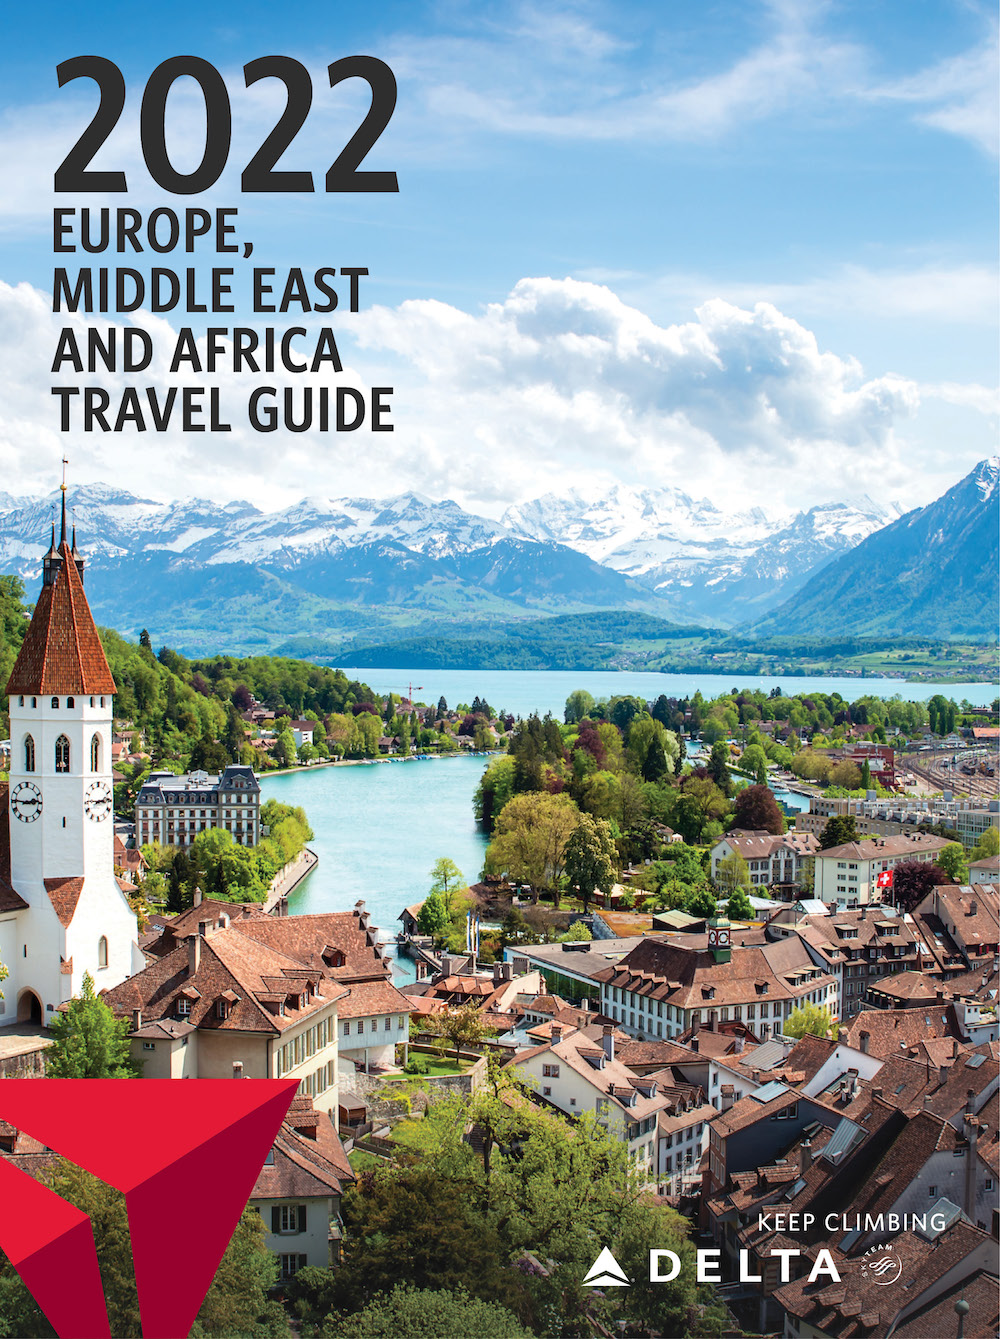 2022-Europe-Middle-East-and-Africa-Guide_300-300x160